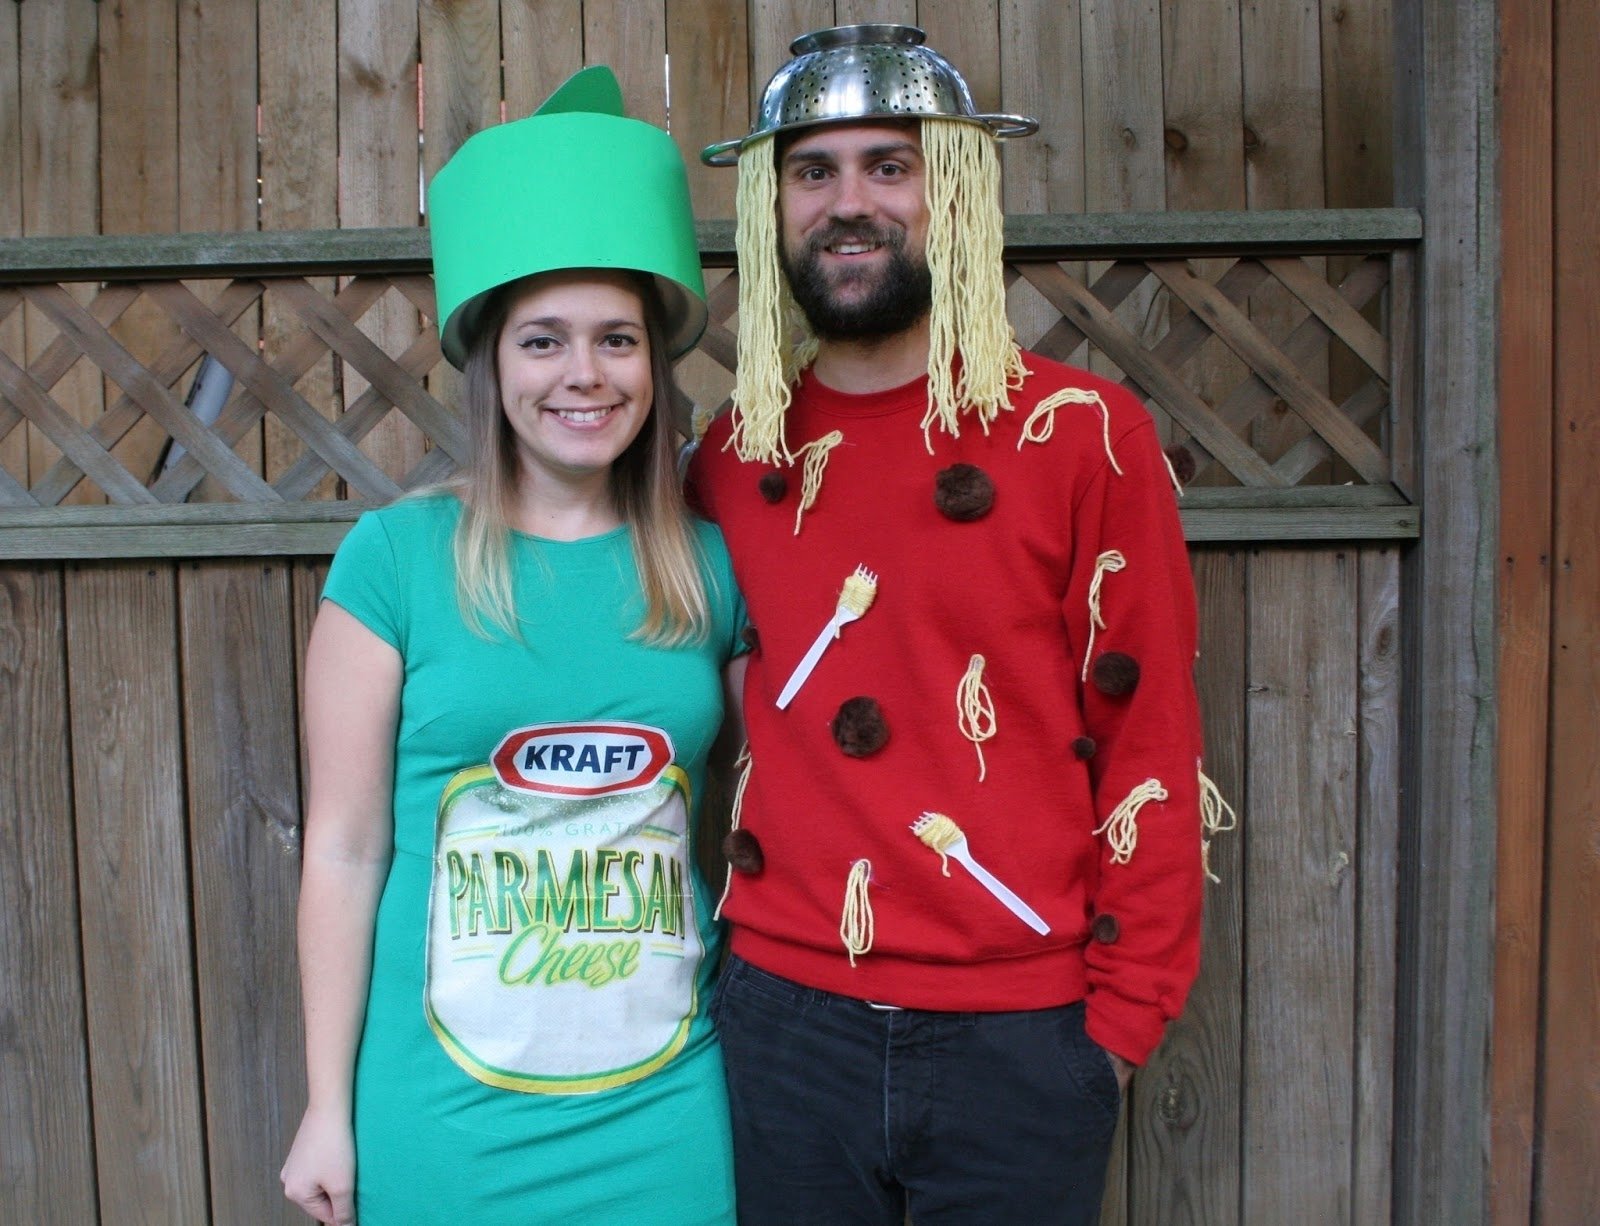 10 Perfect Two Person Halloween Costume Ideas our halloween costumes spaghetti parmesan cheese the surznick 5 2022